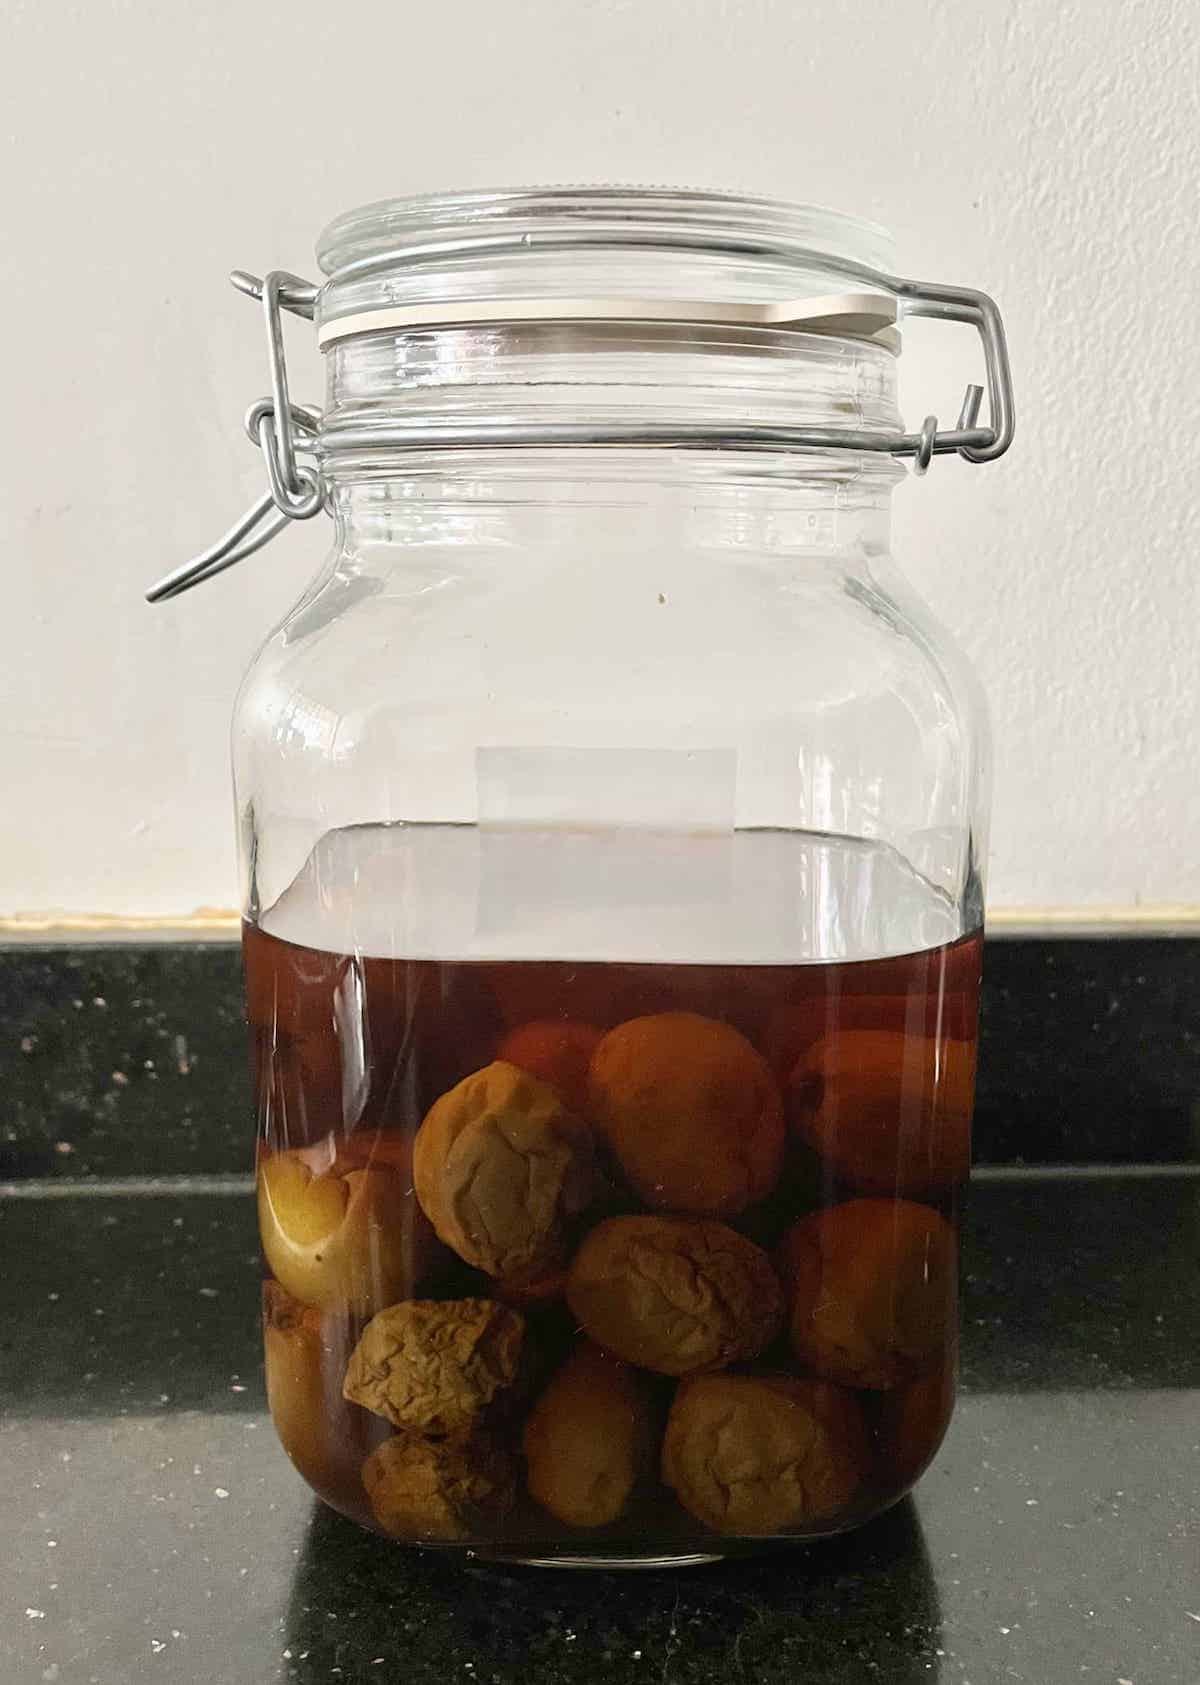 Asian green plums soaking in alcohol to make plum wine.